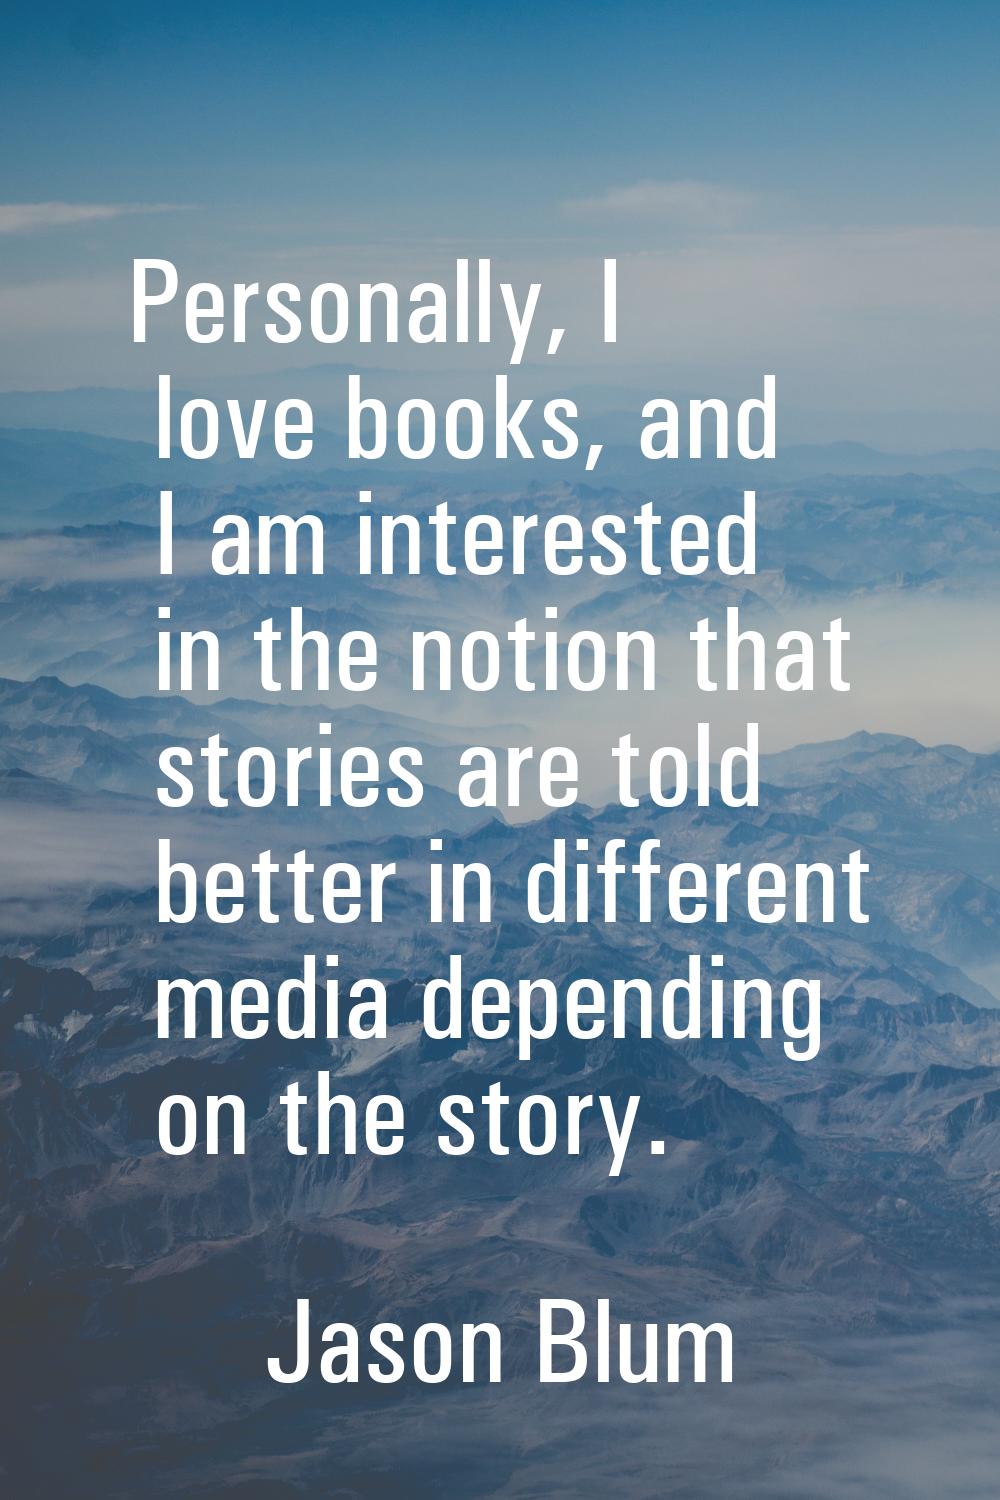 Personally, I love books, and I am interested in the notion that stories are told better in differe